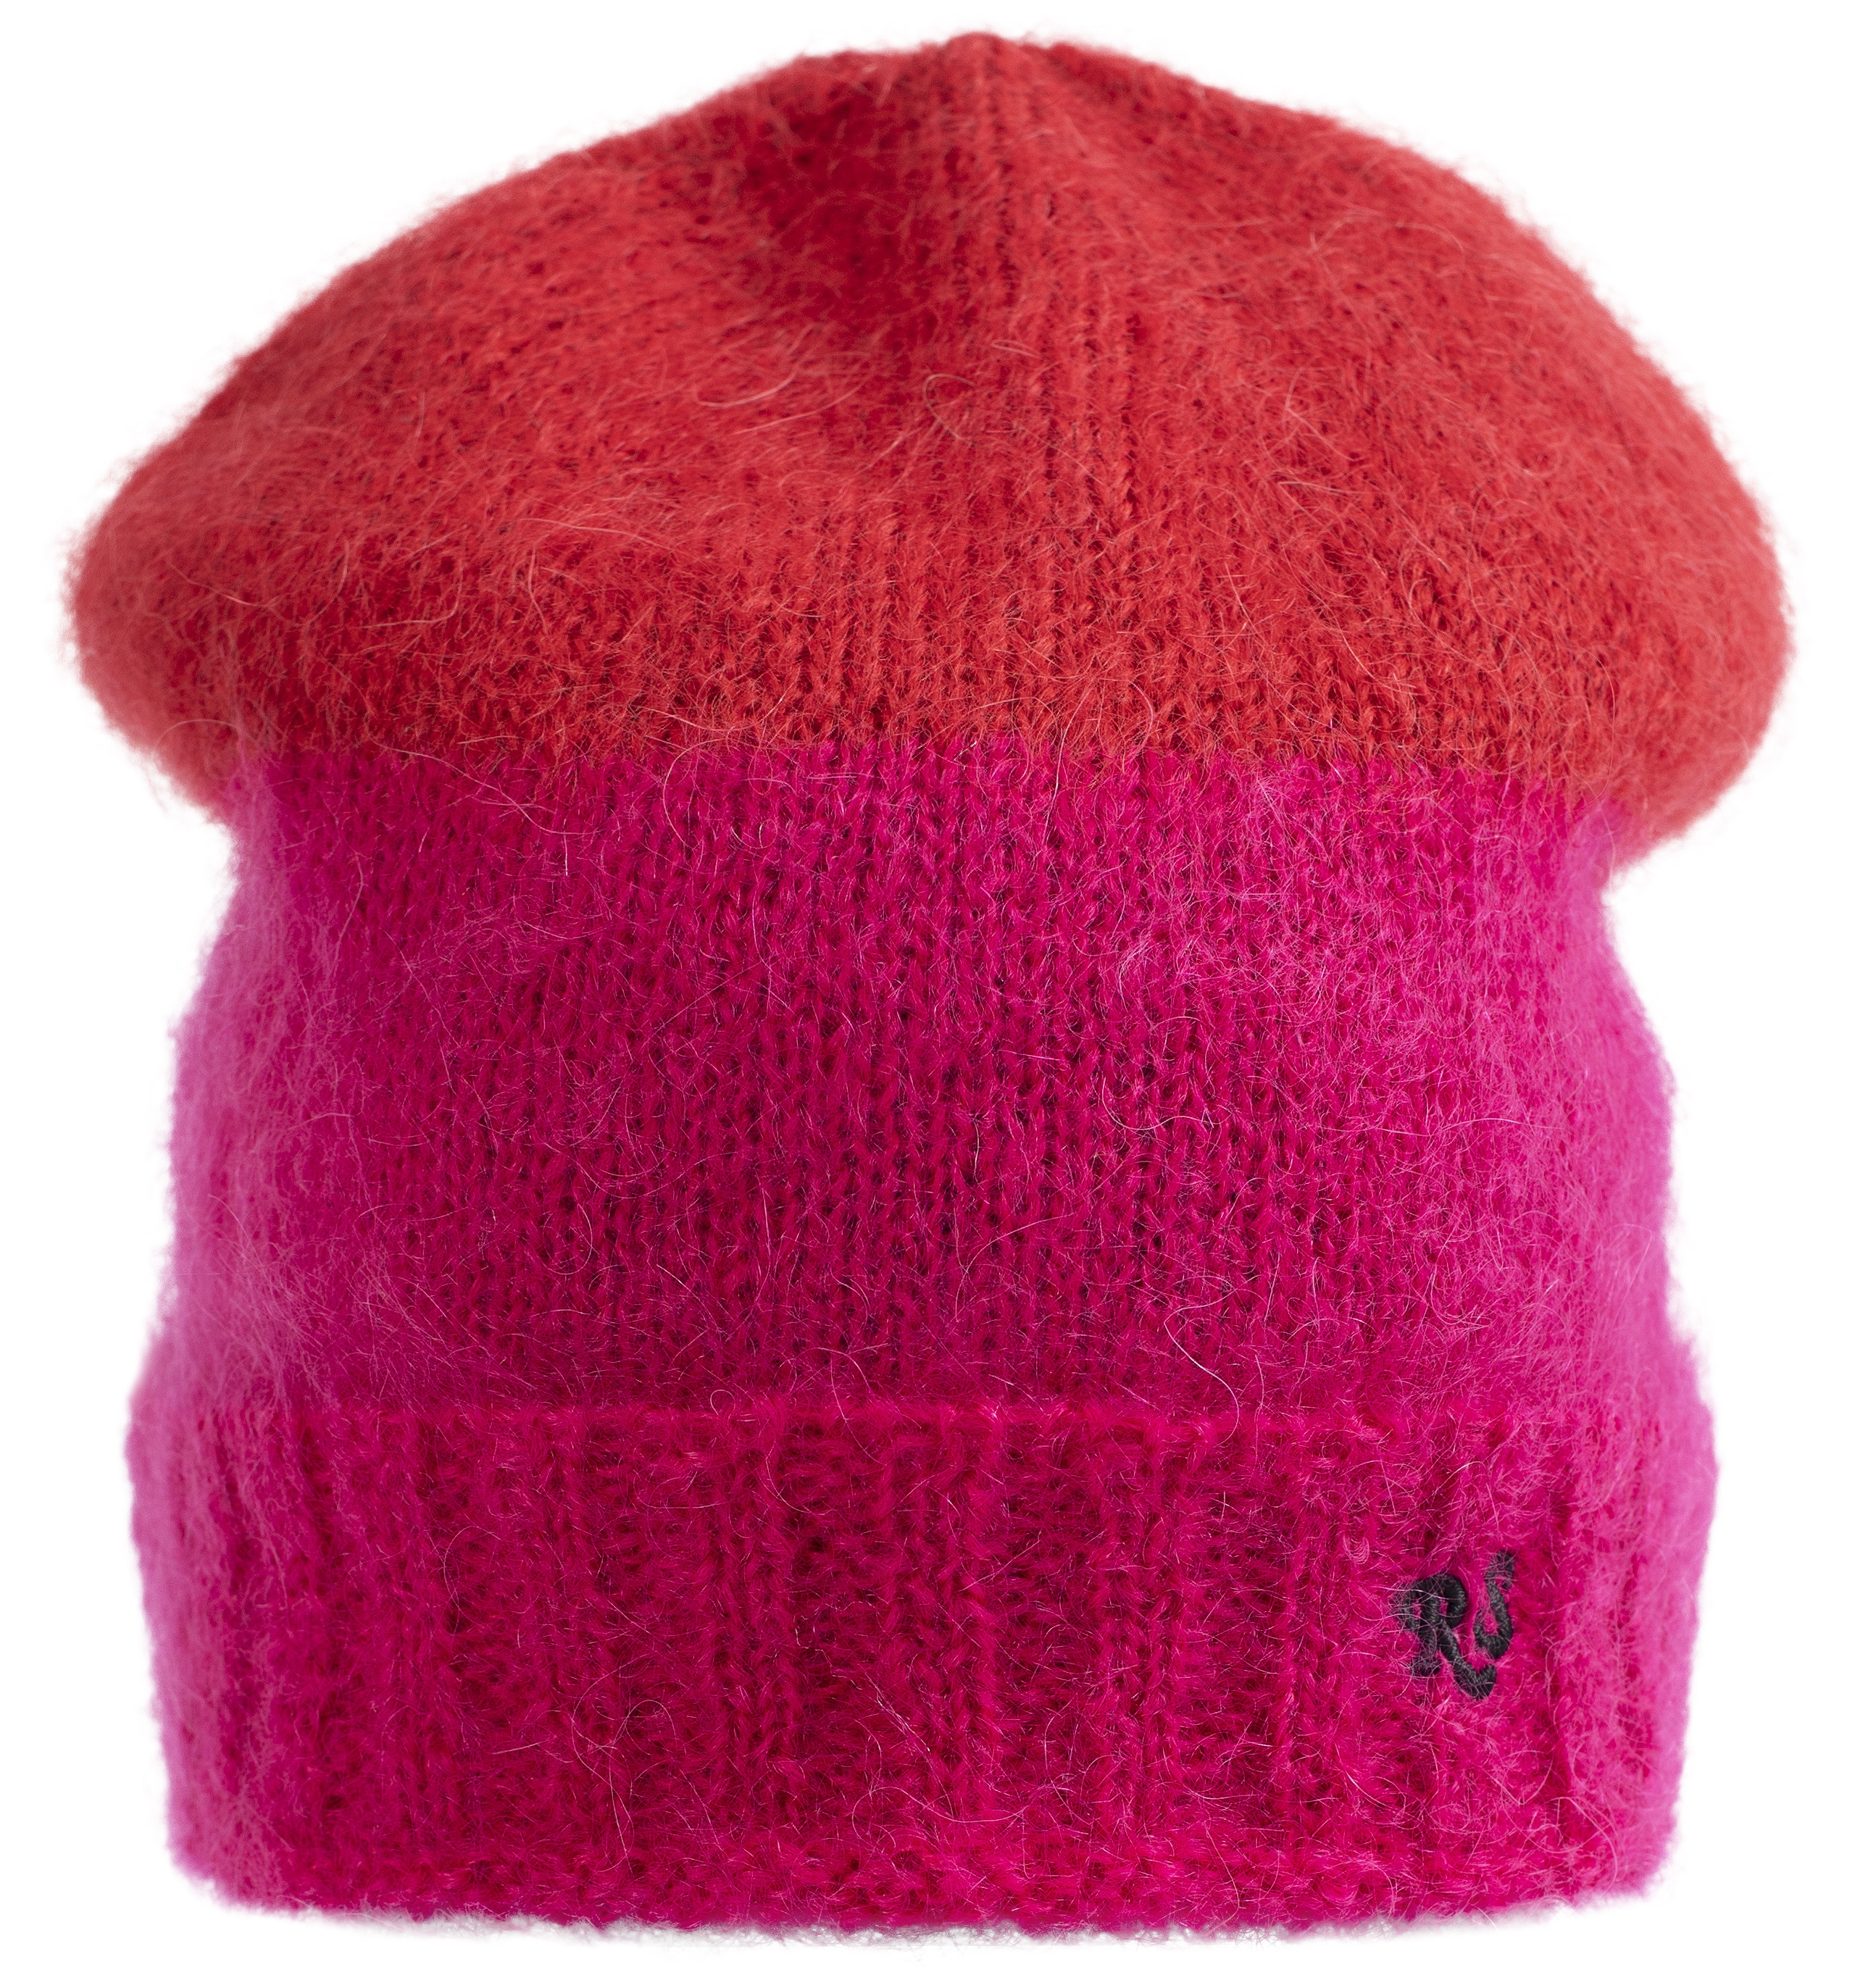 TWO-TONE RS KNIT BEANIE - 1